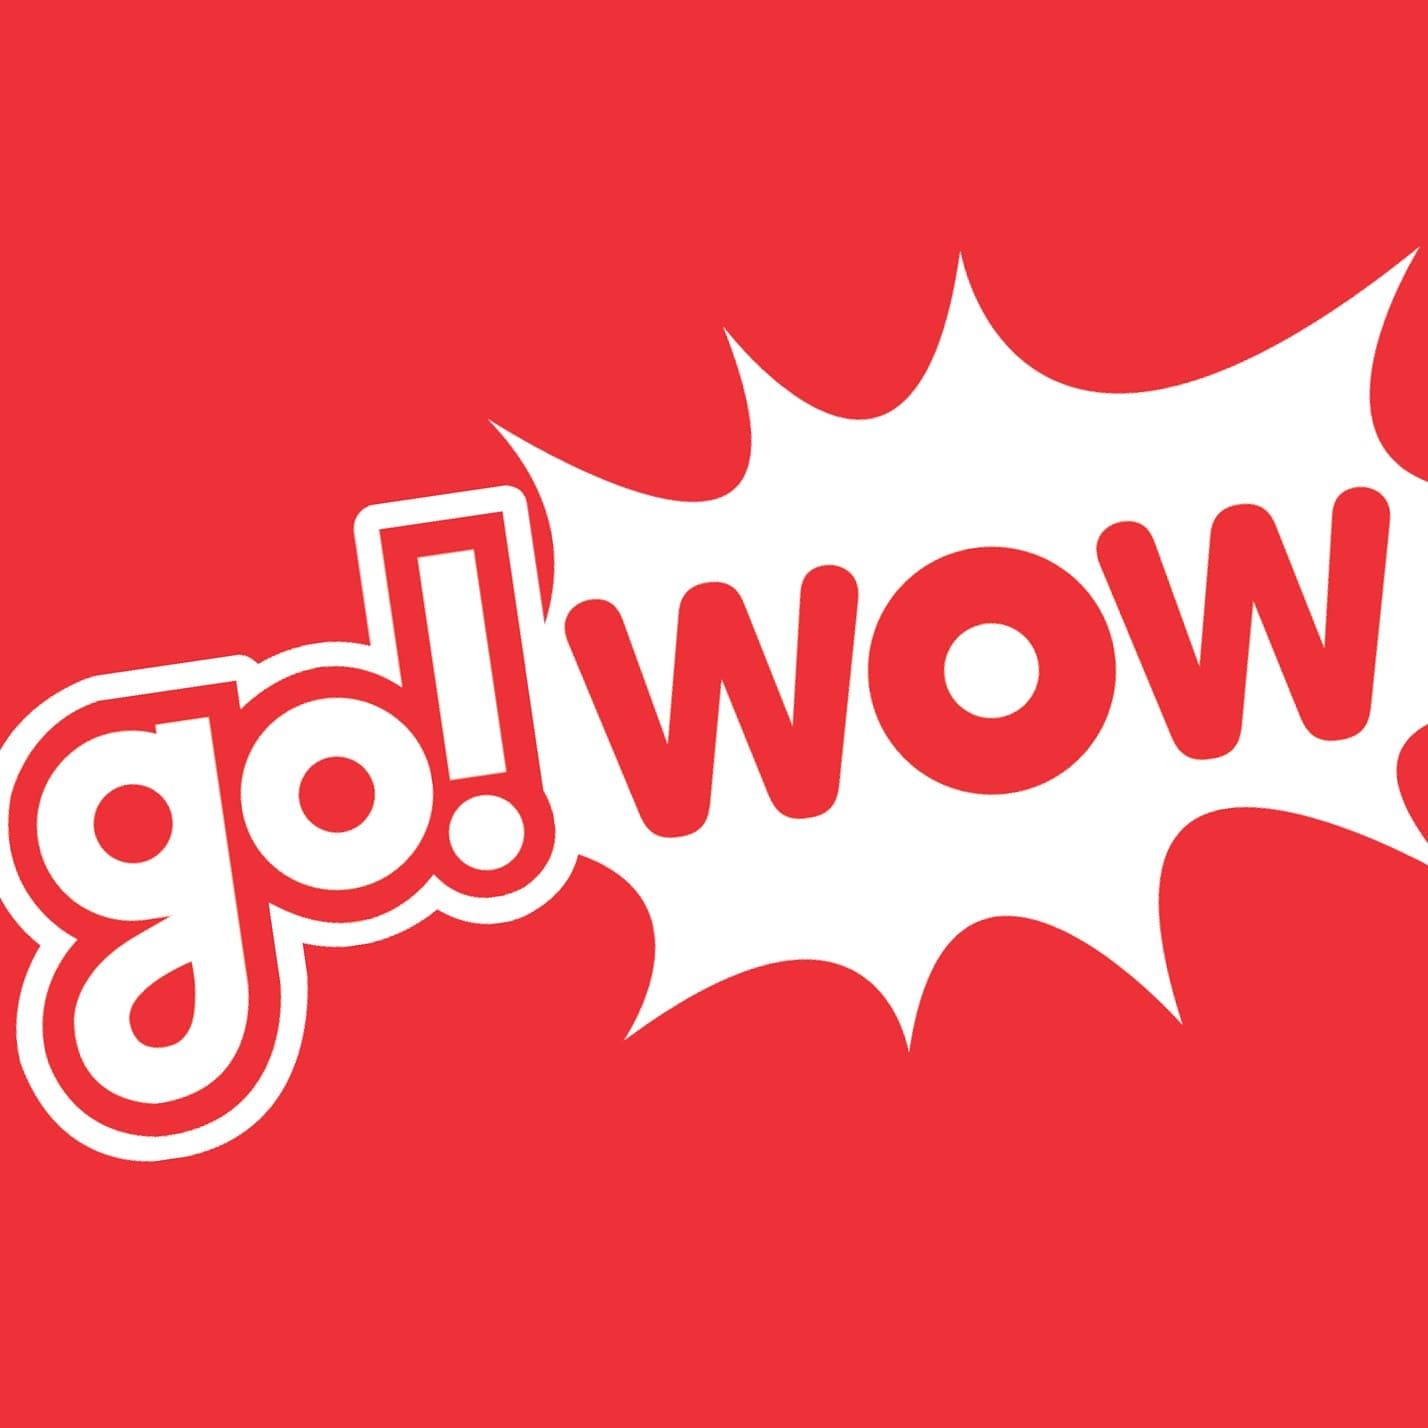 go!WOW - Central Retail Việt Nam